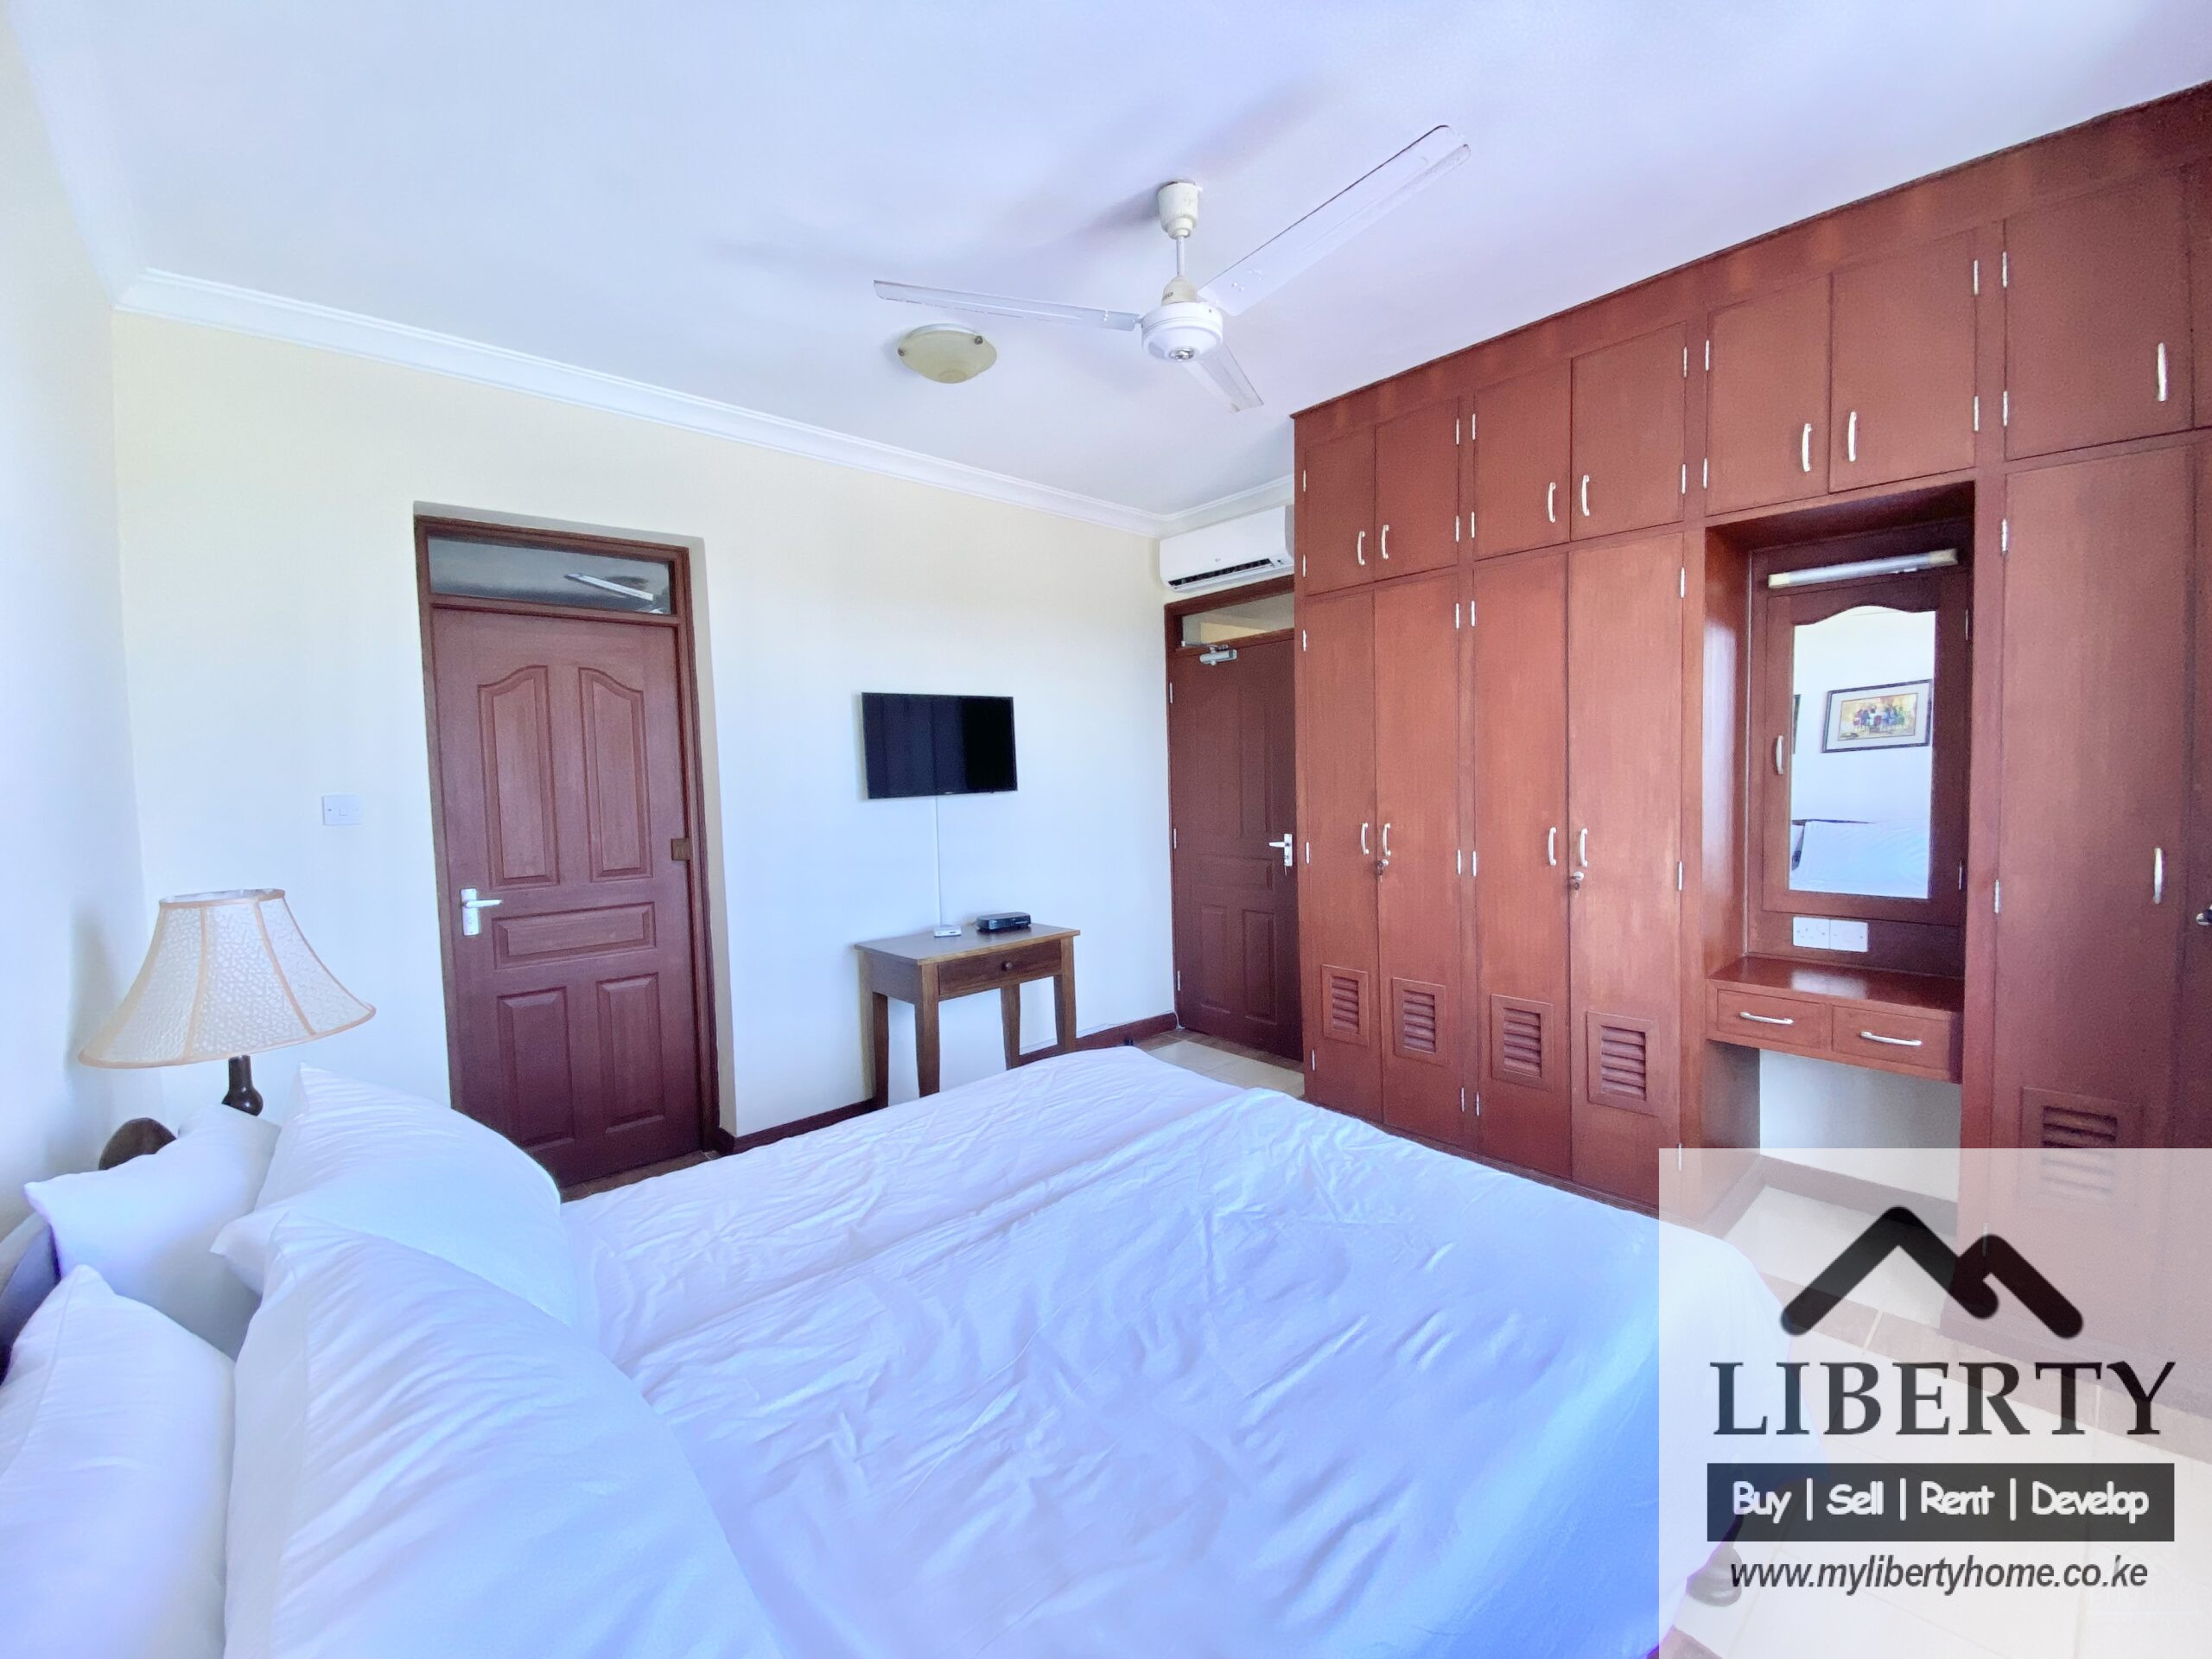 Ocean View 2 Bedroom Furnished Apartment In Mombasa-Nyali For Short-Term Stay-10K- Ref-772